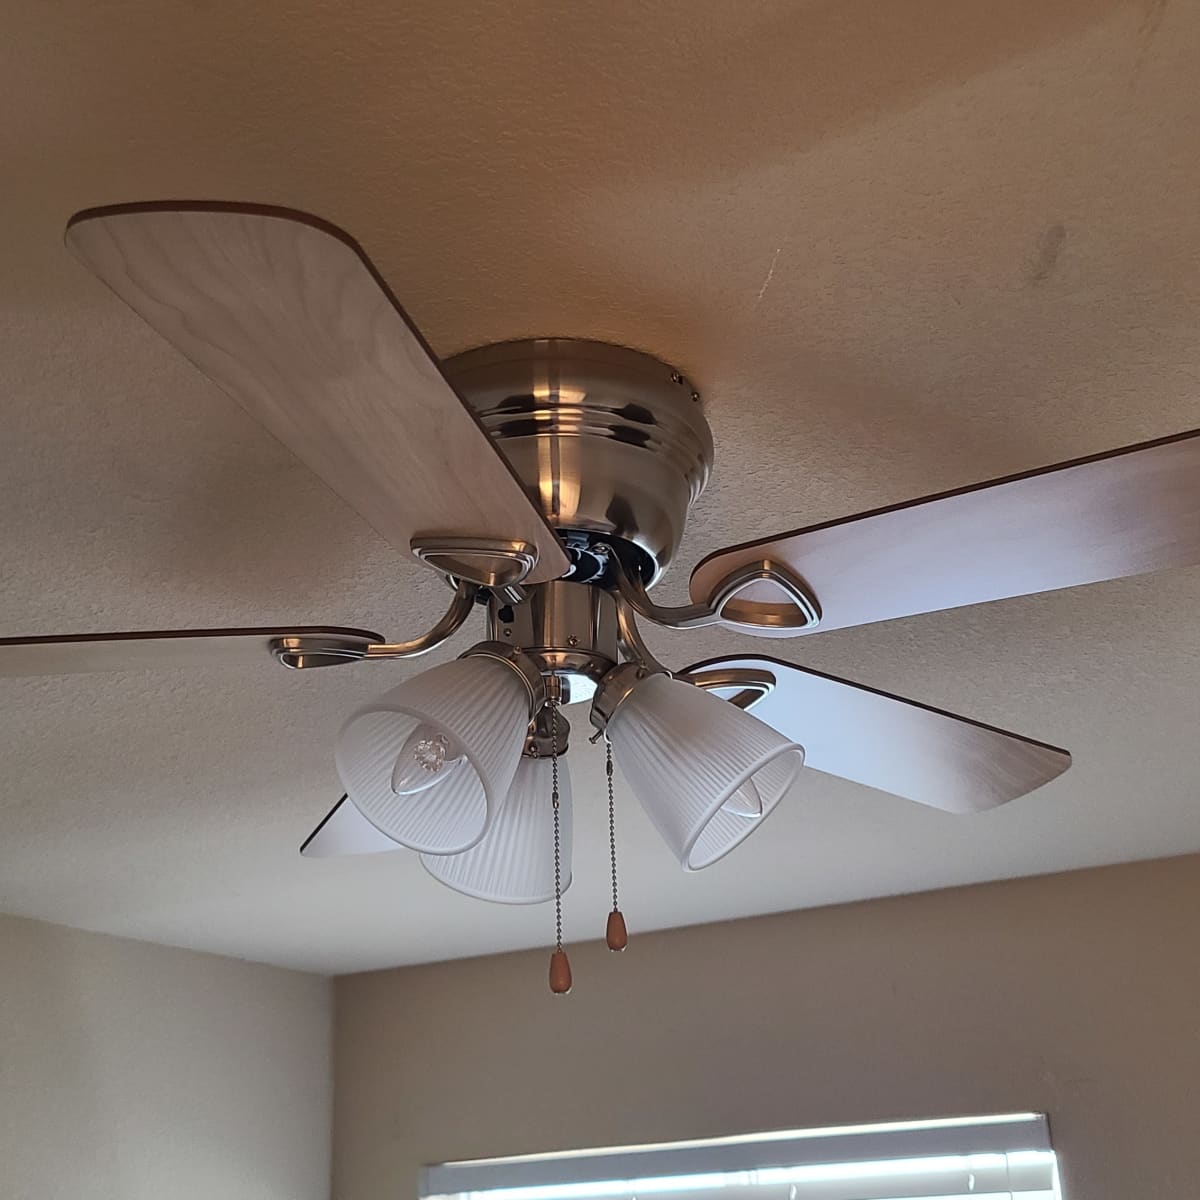 To Balance A Ceiling Fan Using Coin